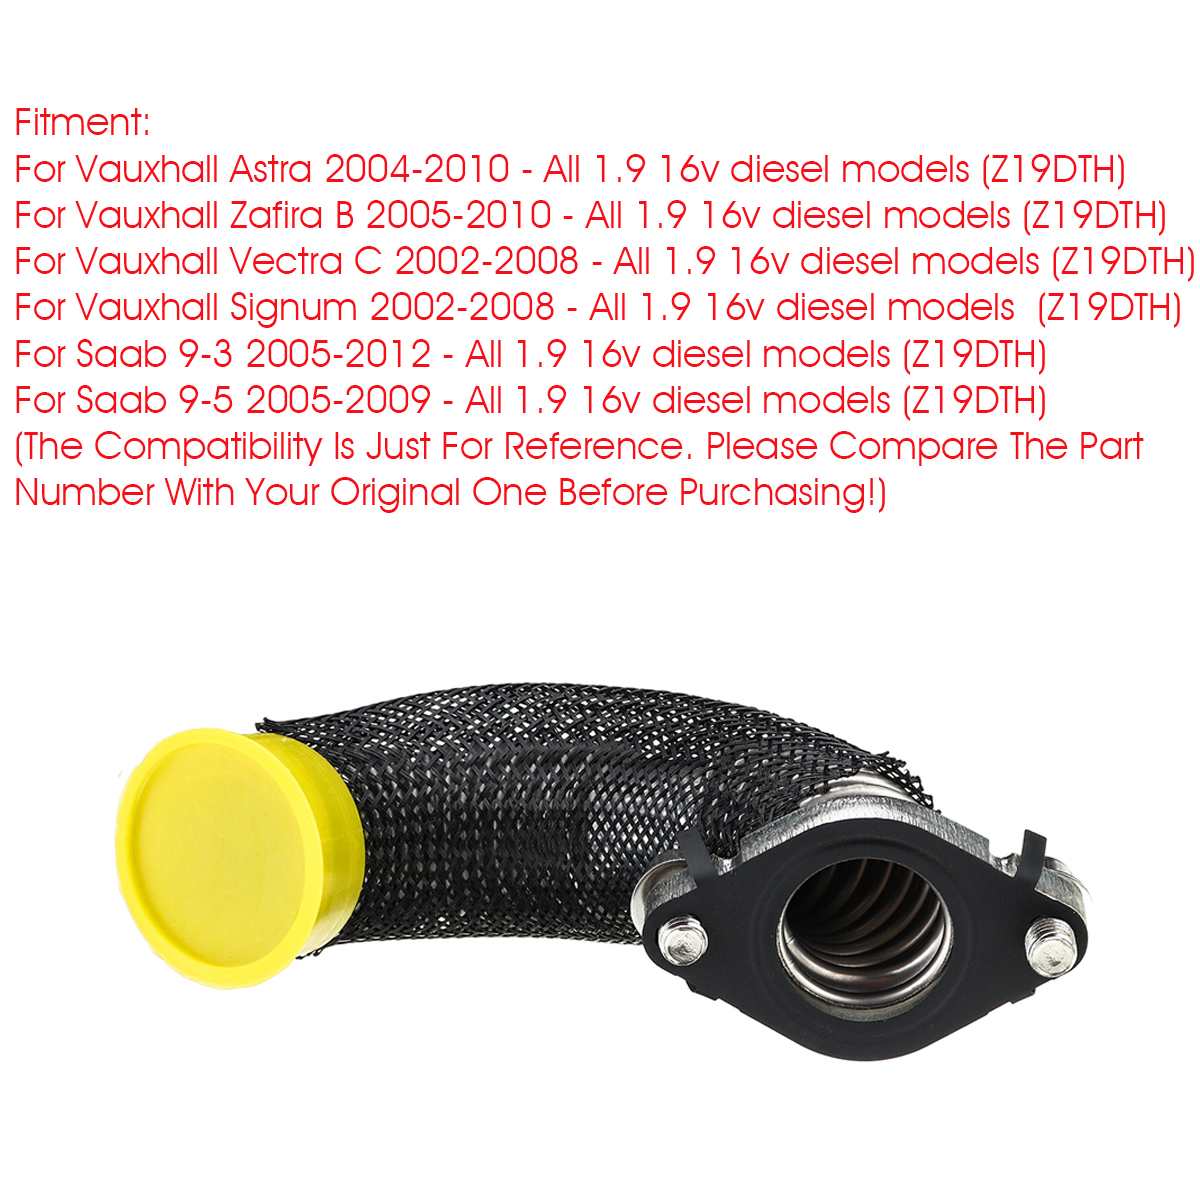 Car EGR Valve Cooling Pipe & Gasket 55202704 For Vauxhall Astra Zafira B Vectra C Signum For Saab 9-3 9-5